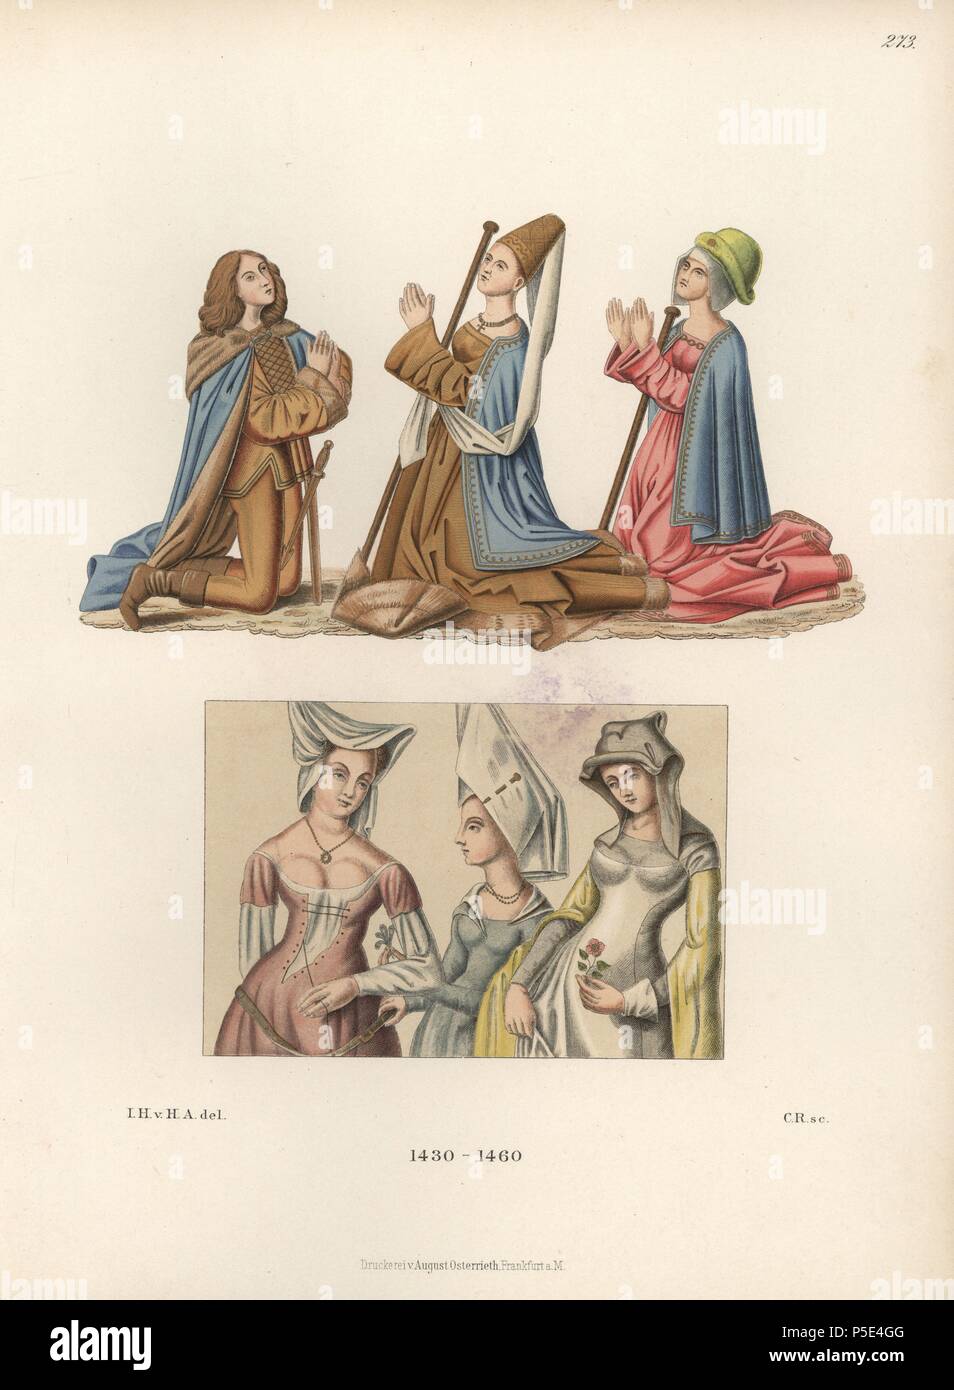 Male and female fashion from the mid 15th century. Top: A knight kneeling with two women from a silk embroidery in the Sakristei des Domes, Aachen. Bottom: three women from a sketchbook by a Dutch master in Berlin Library. Chromolithograph from Hefner-Alteneck's 'Costumes, Artworks and Appliances from the early Middle Ages to the end of the 18th Century,' Frankfurt, 1883. IIlustration drawn by Hefner-Alteneck, lithographed by C. Regnier, and published by Heinrich Keller. Dr. Jakob Heinrich von Hefner-Alteneck (1811-1903) was a German archeologist, art historian and illustrator. He was director Stock Photo